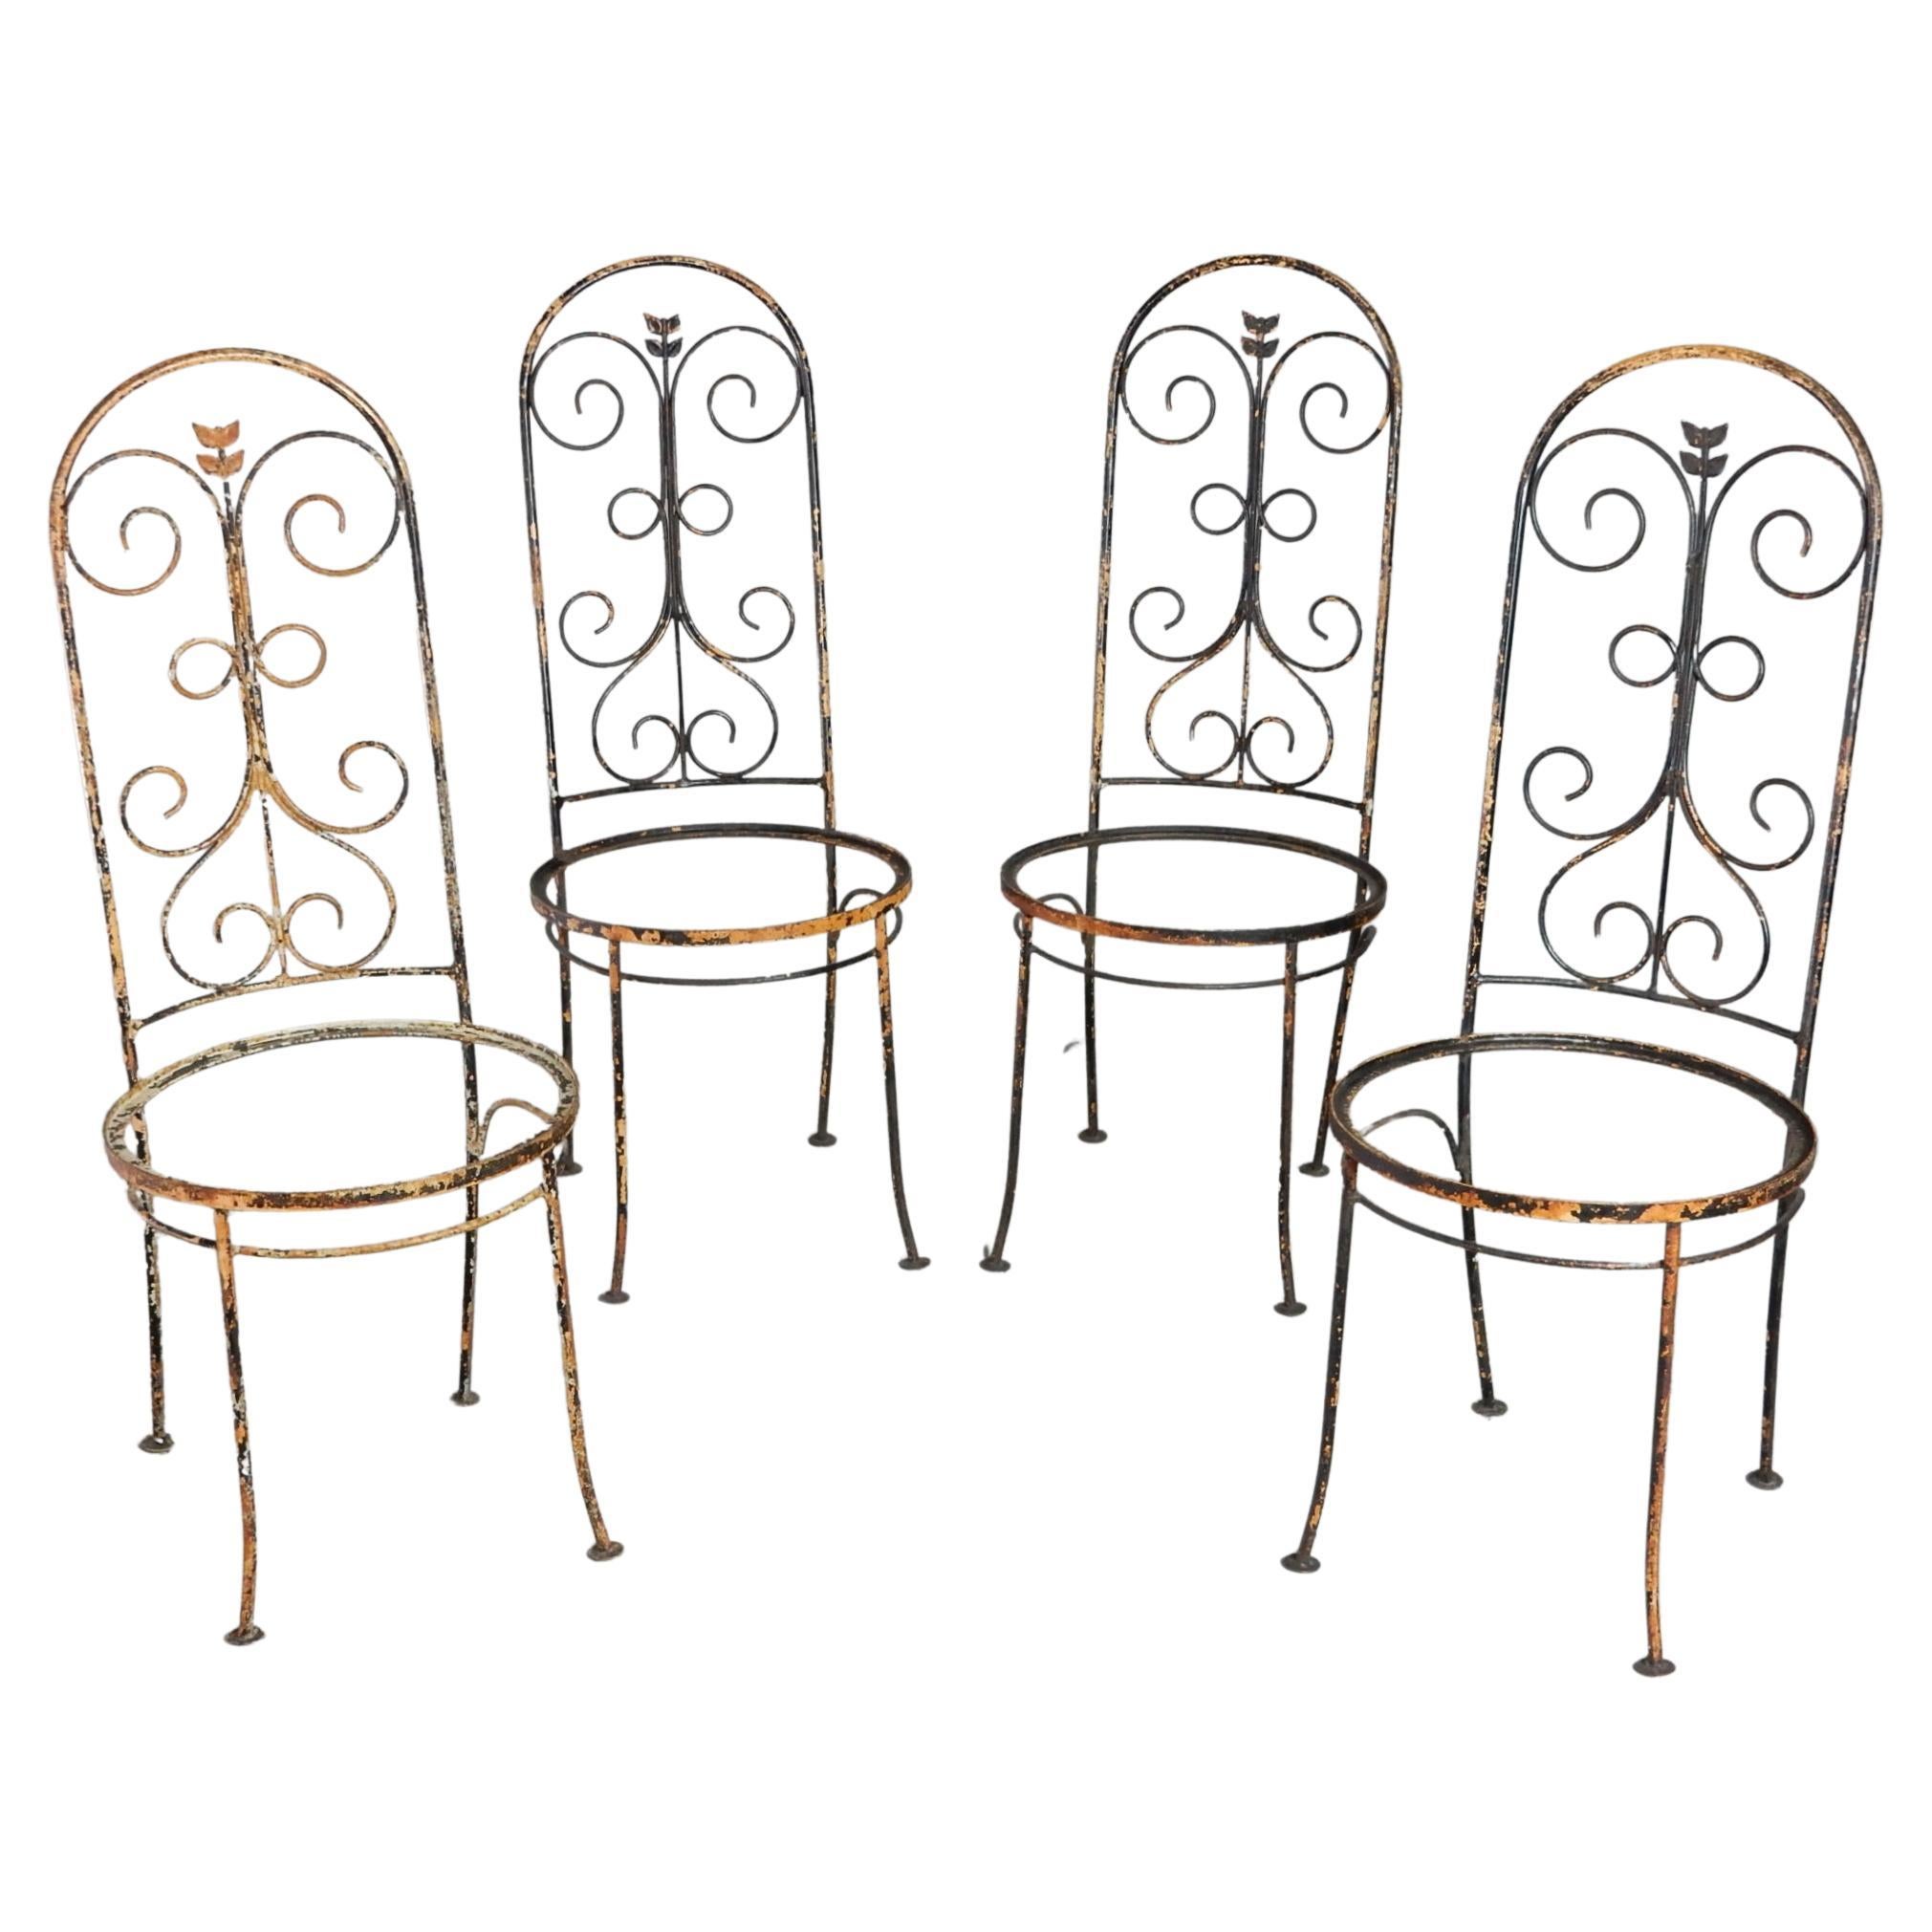 1940's French Artistic Iron Tall Back Garden Patio Chairs For Sale